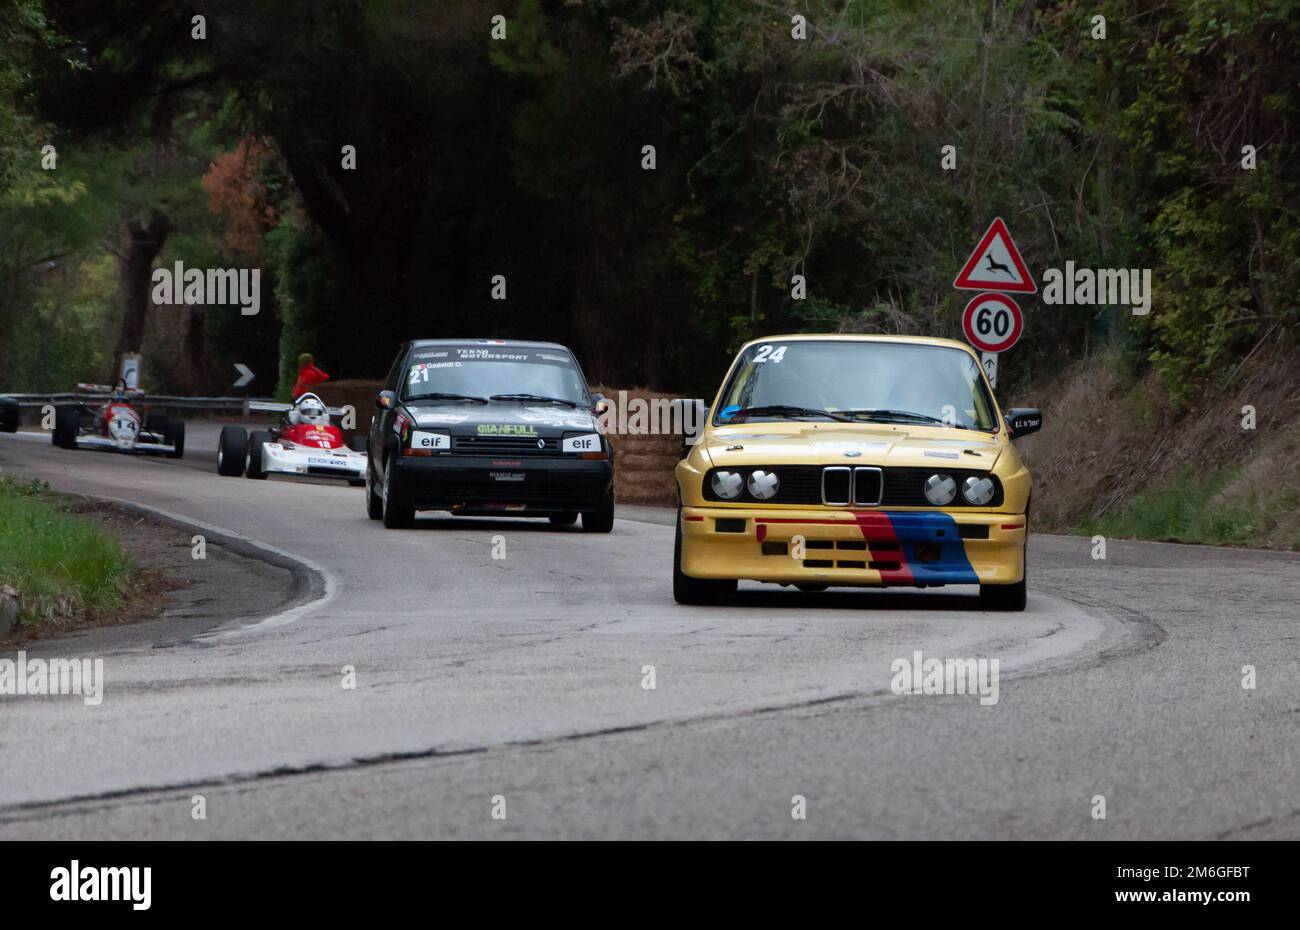 BMW 2002 on an old racing car ifor rally Stock Photo